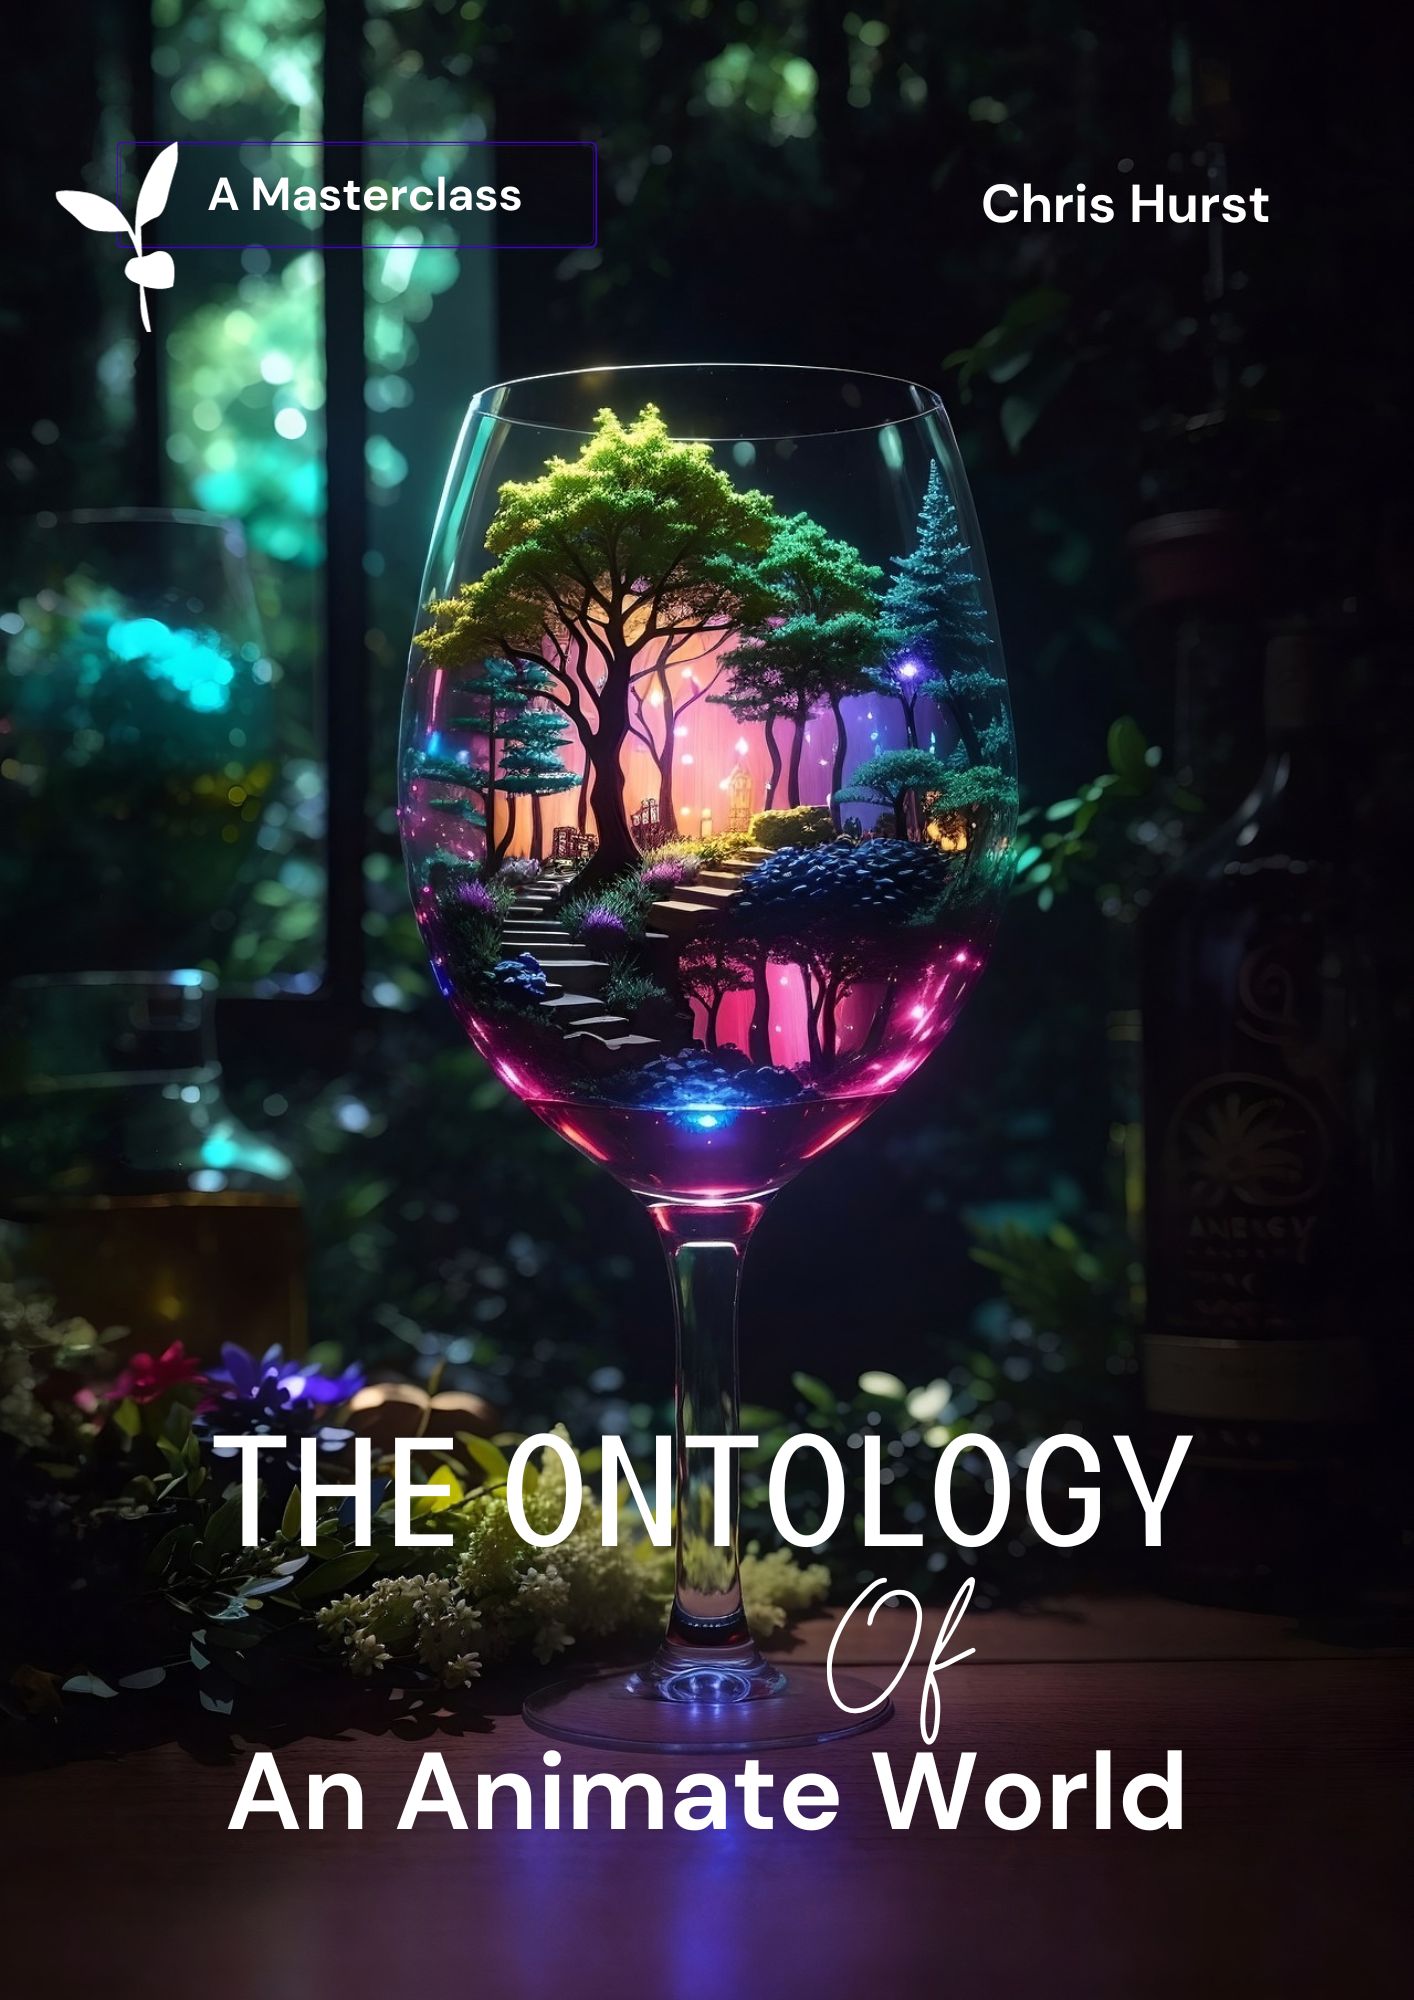 E-book cover - The Ontology of An Animate World